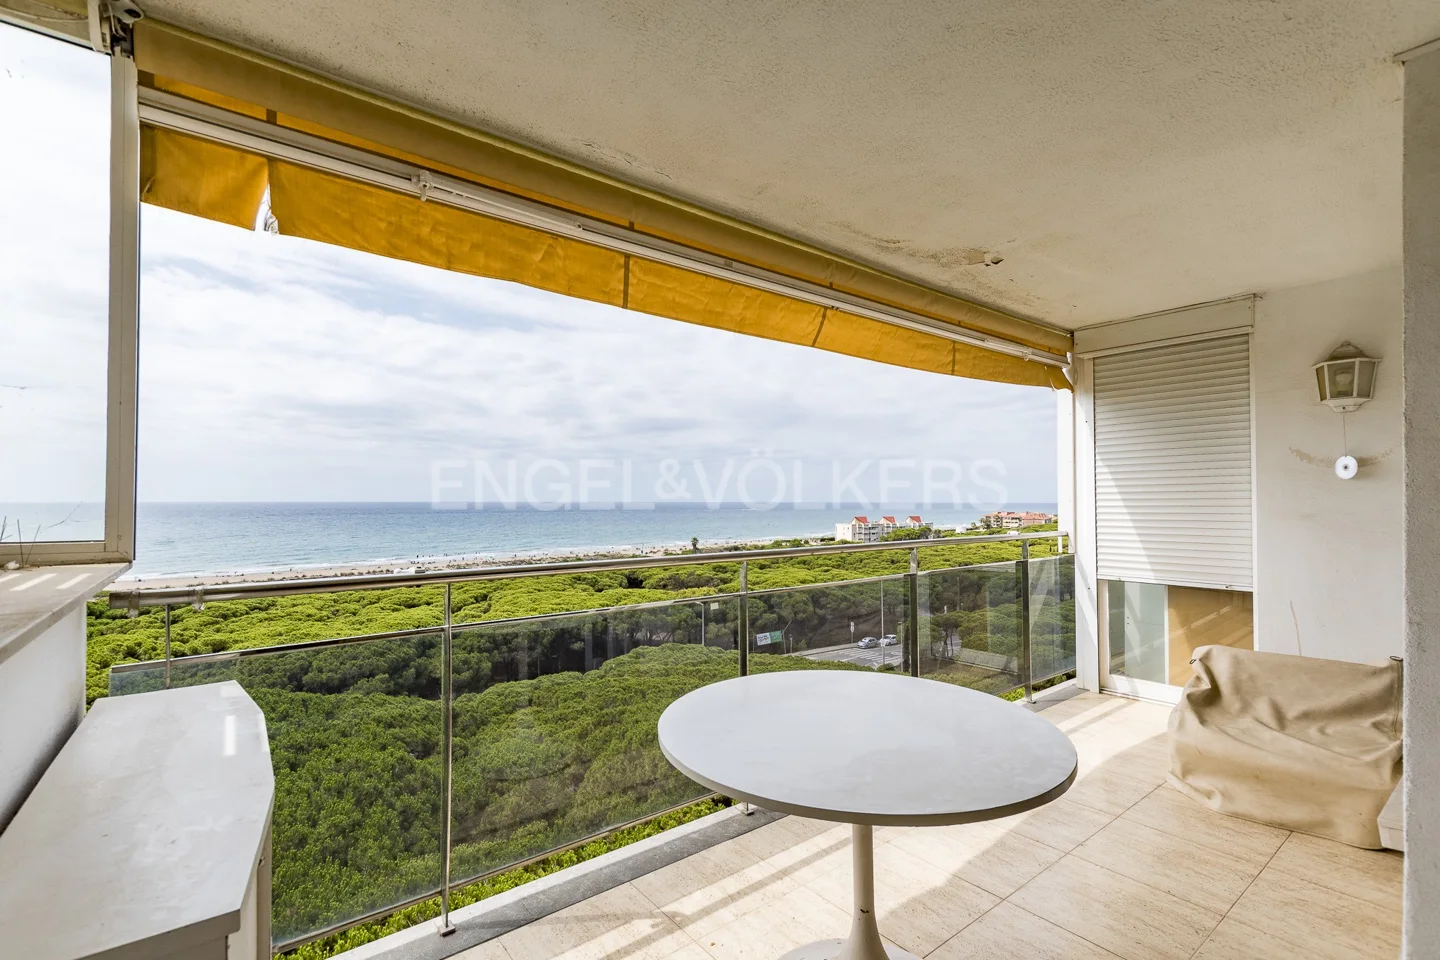 A duplex overlooking the sea from the highest point!